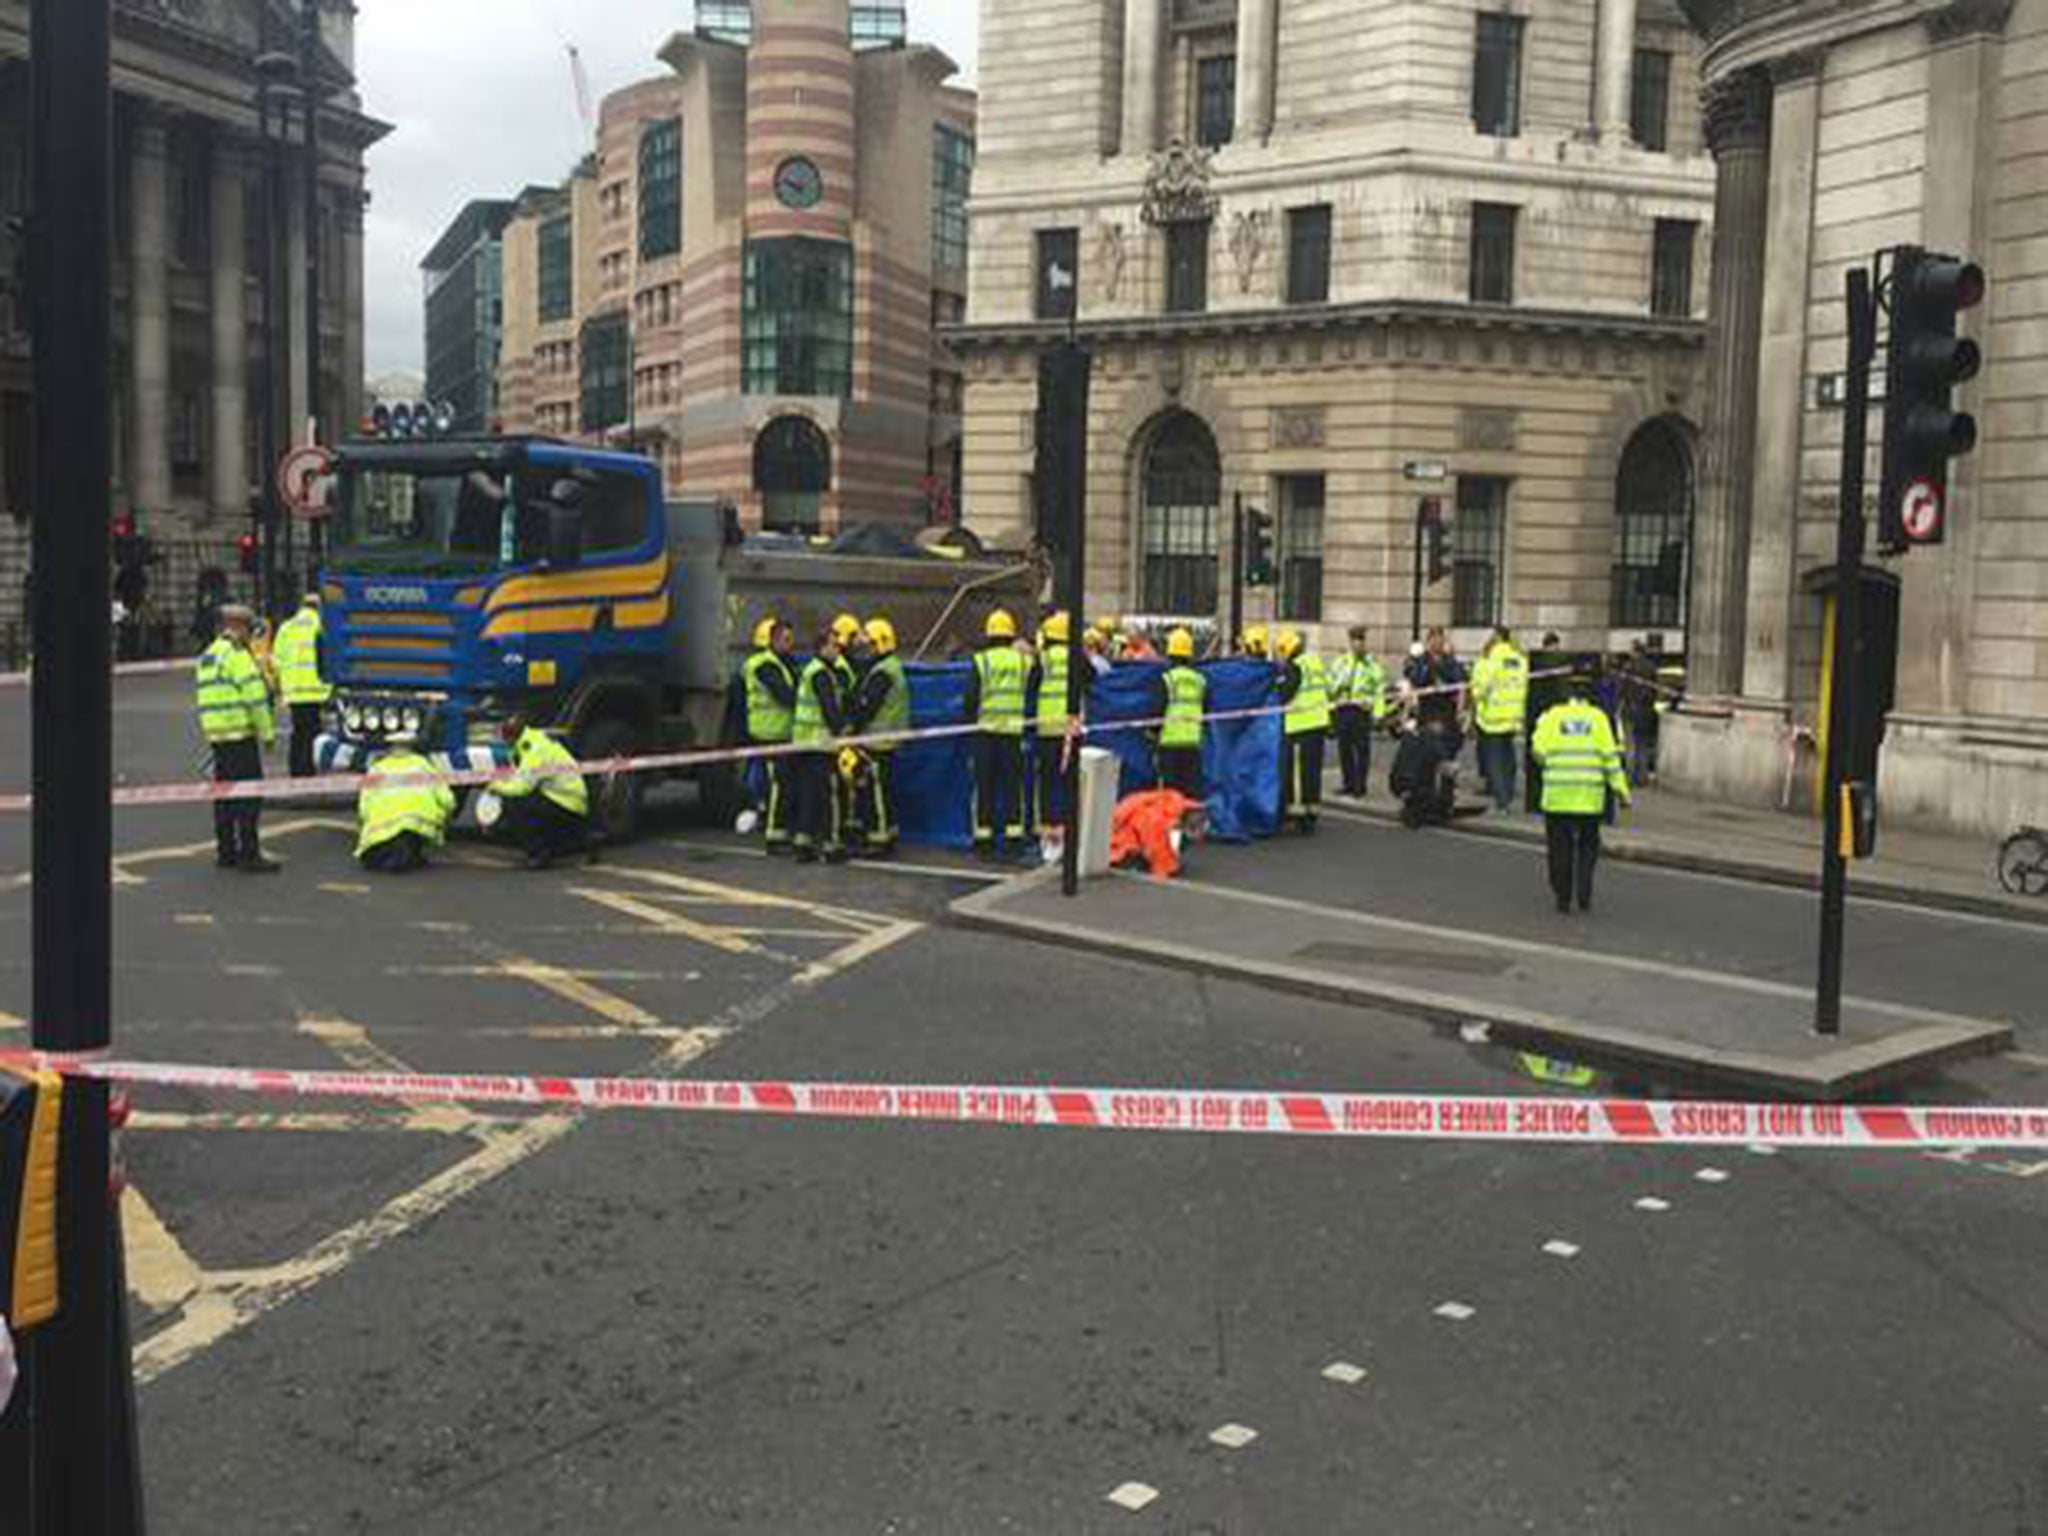 The woman, 26, has died after her bike collided with a tipper truck near the Bank of England